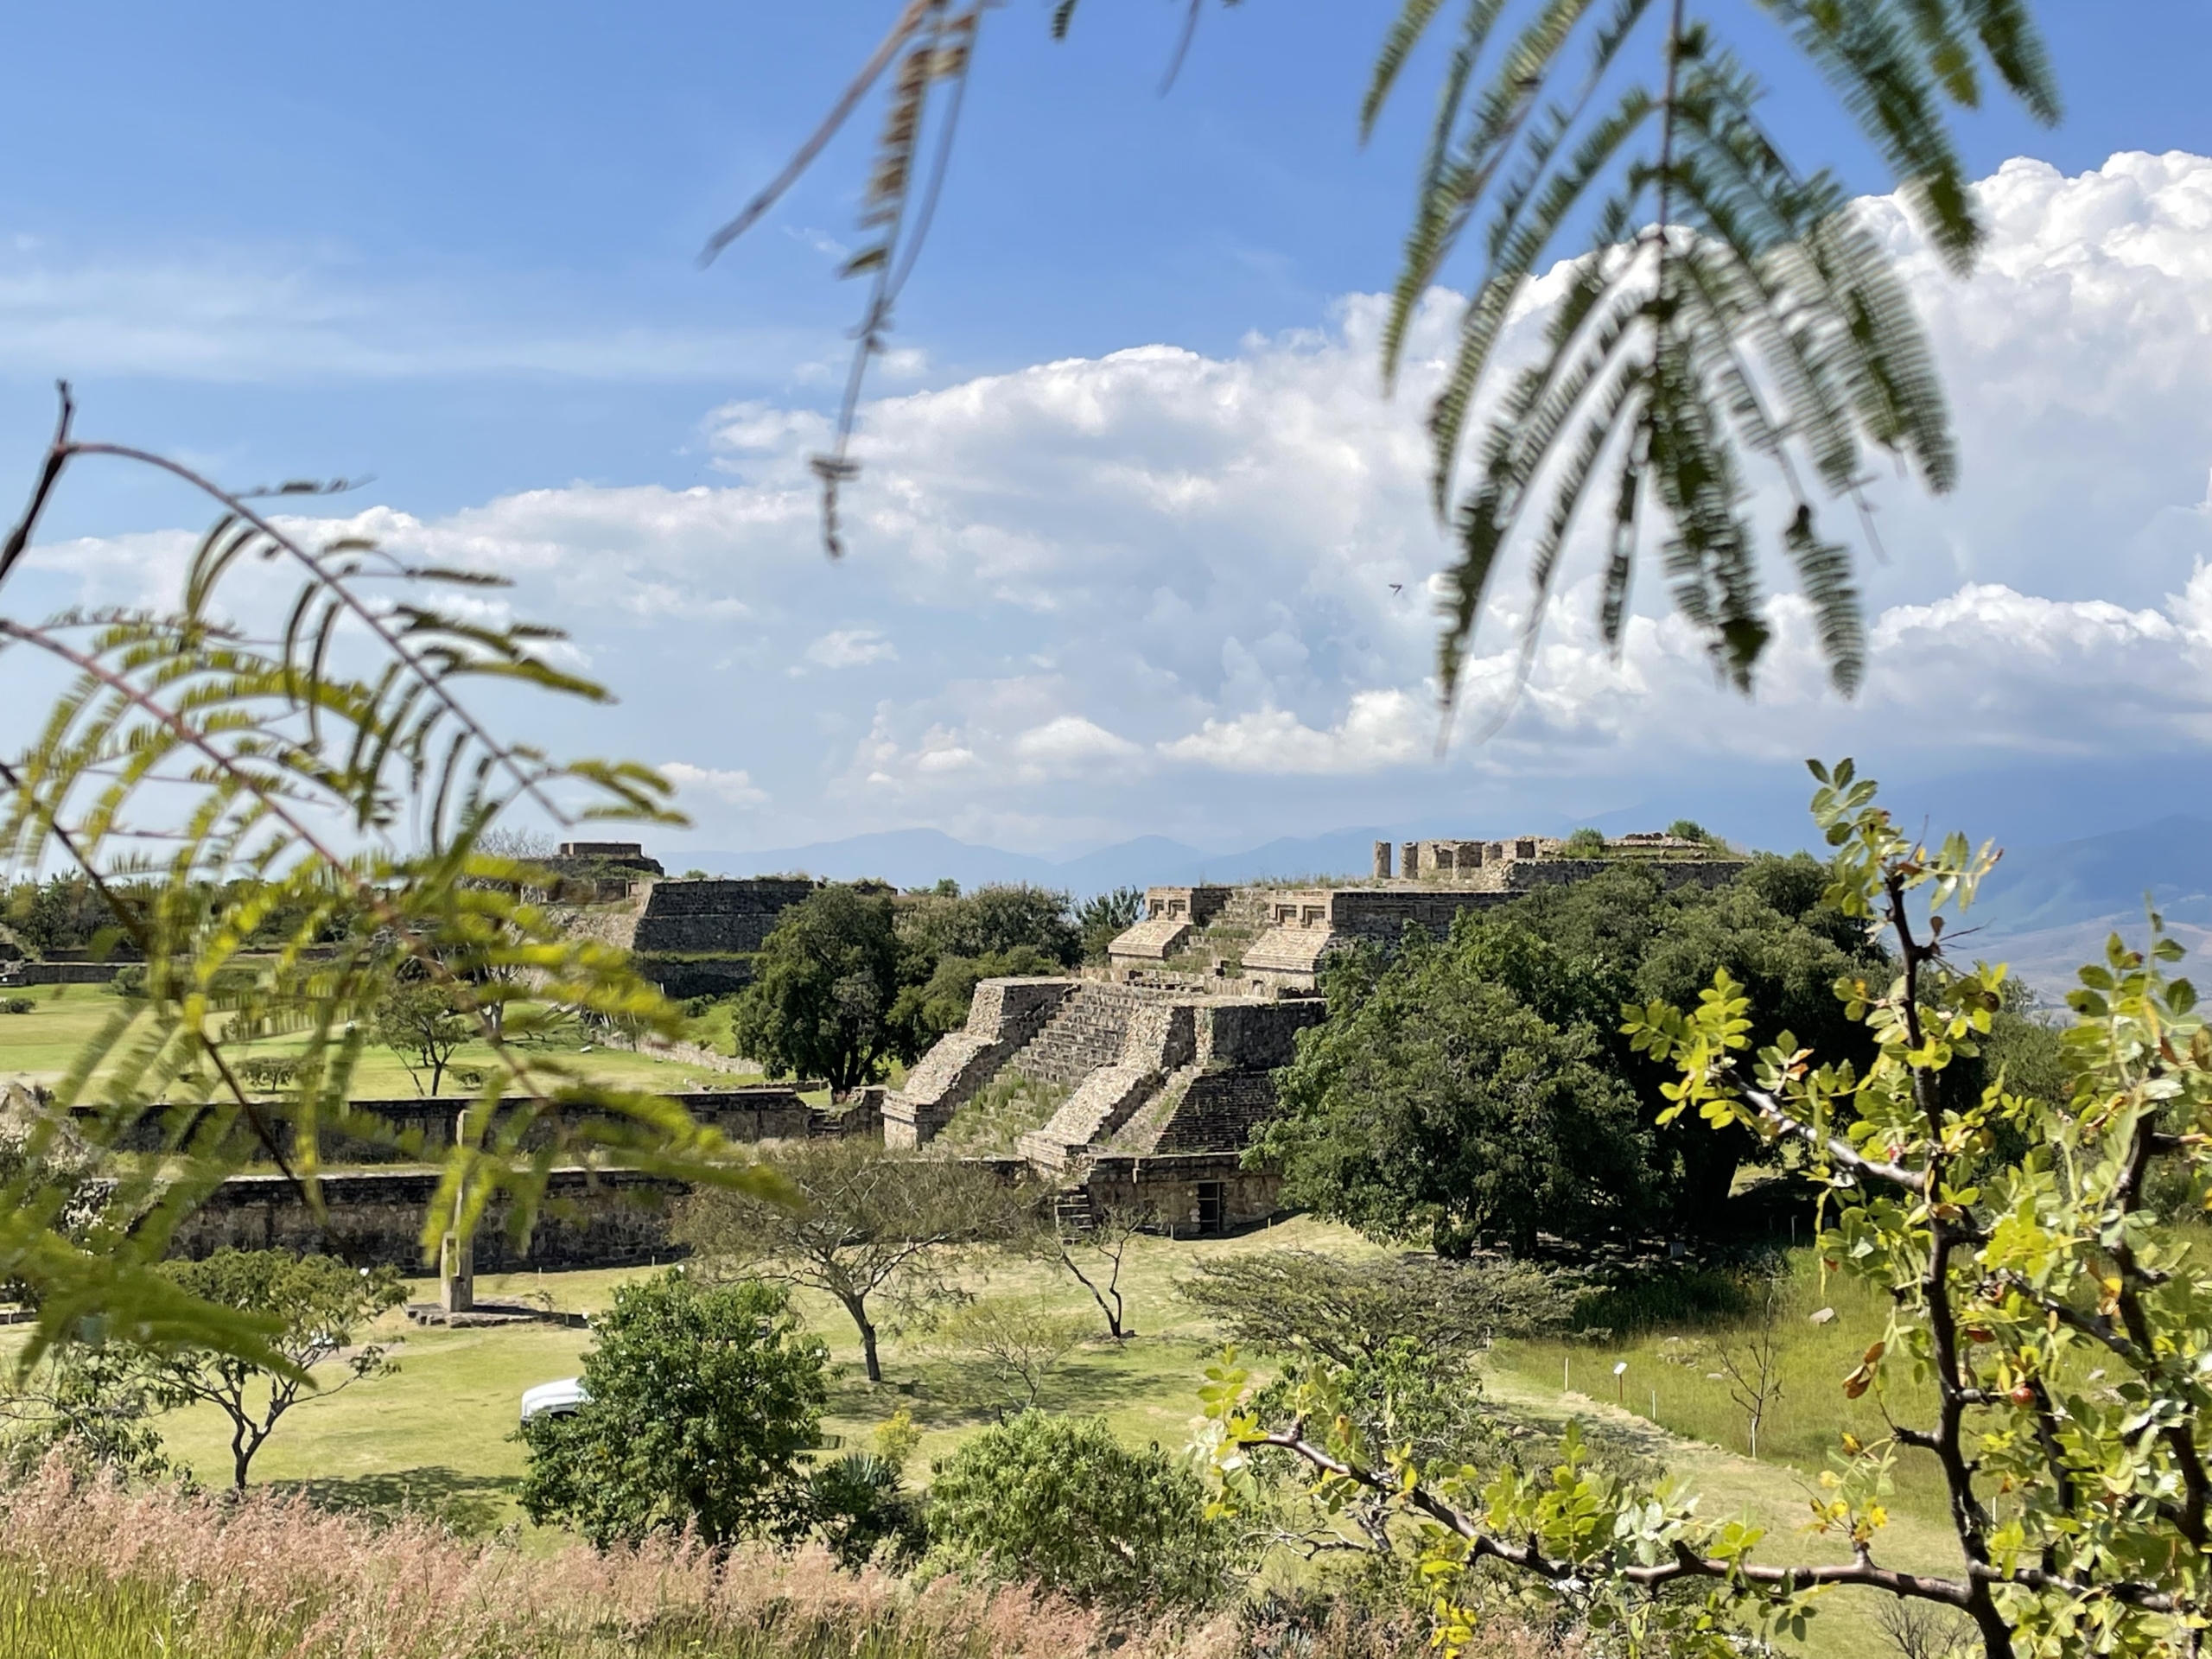 Monte Albán ruins are an archaeological marvel, showcasing the ancient Zapotec civilization's remarkable achievements in architecture, art, and urban planning.